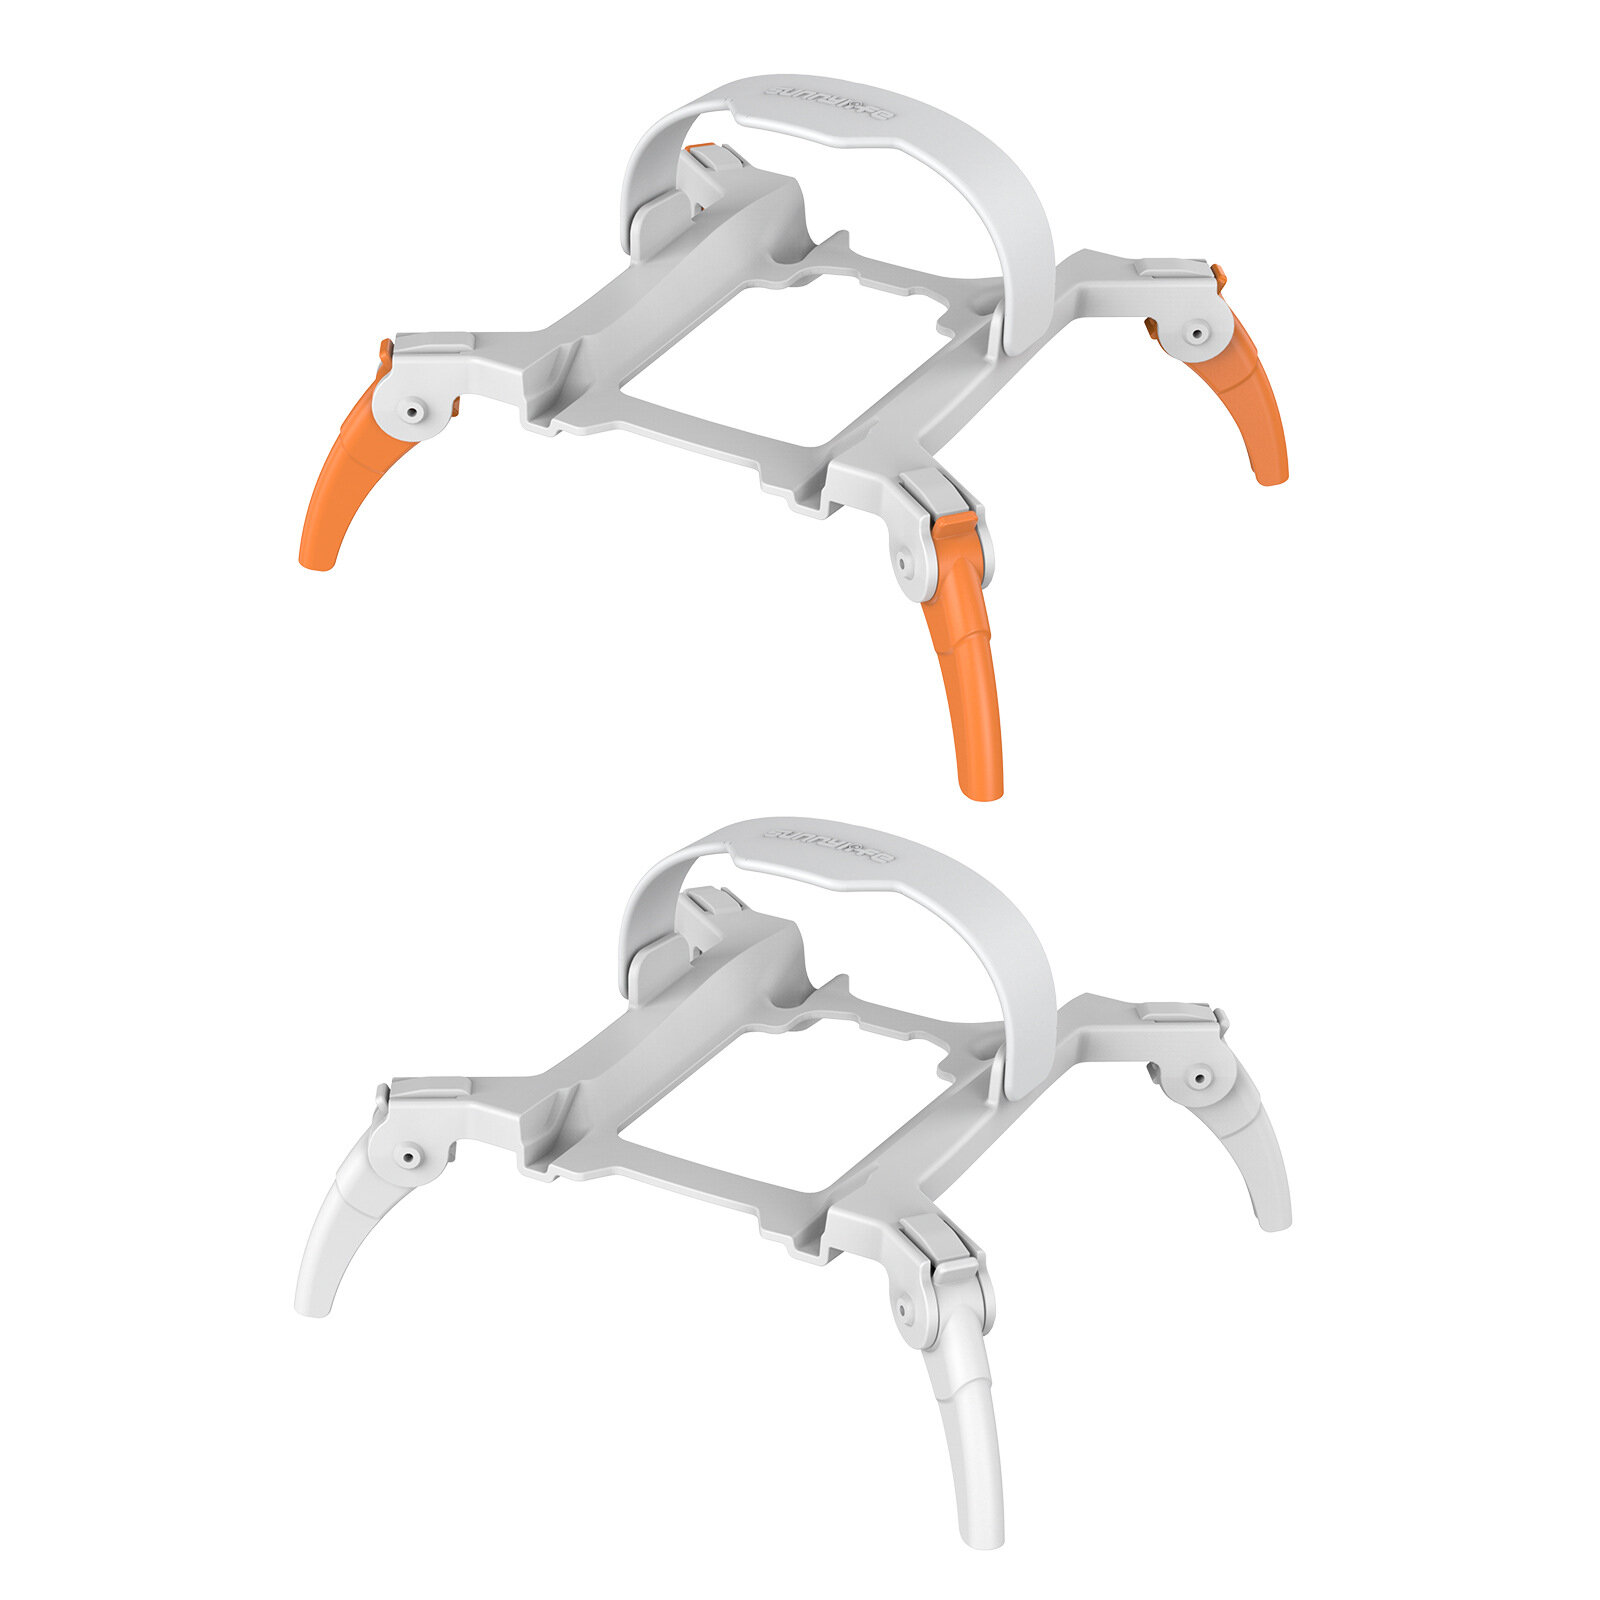 

Sunnylife Foldable Extended Heightening Spider Landing Gear Legs Protector Support for DJI Mini 3 RC Drone Quadcopter